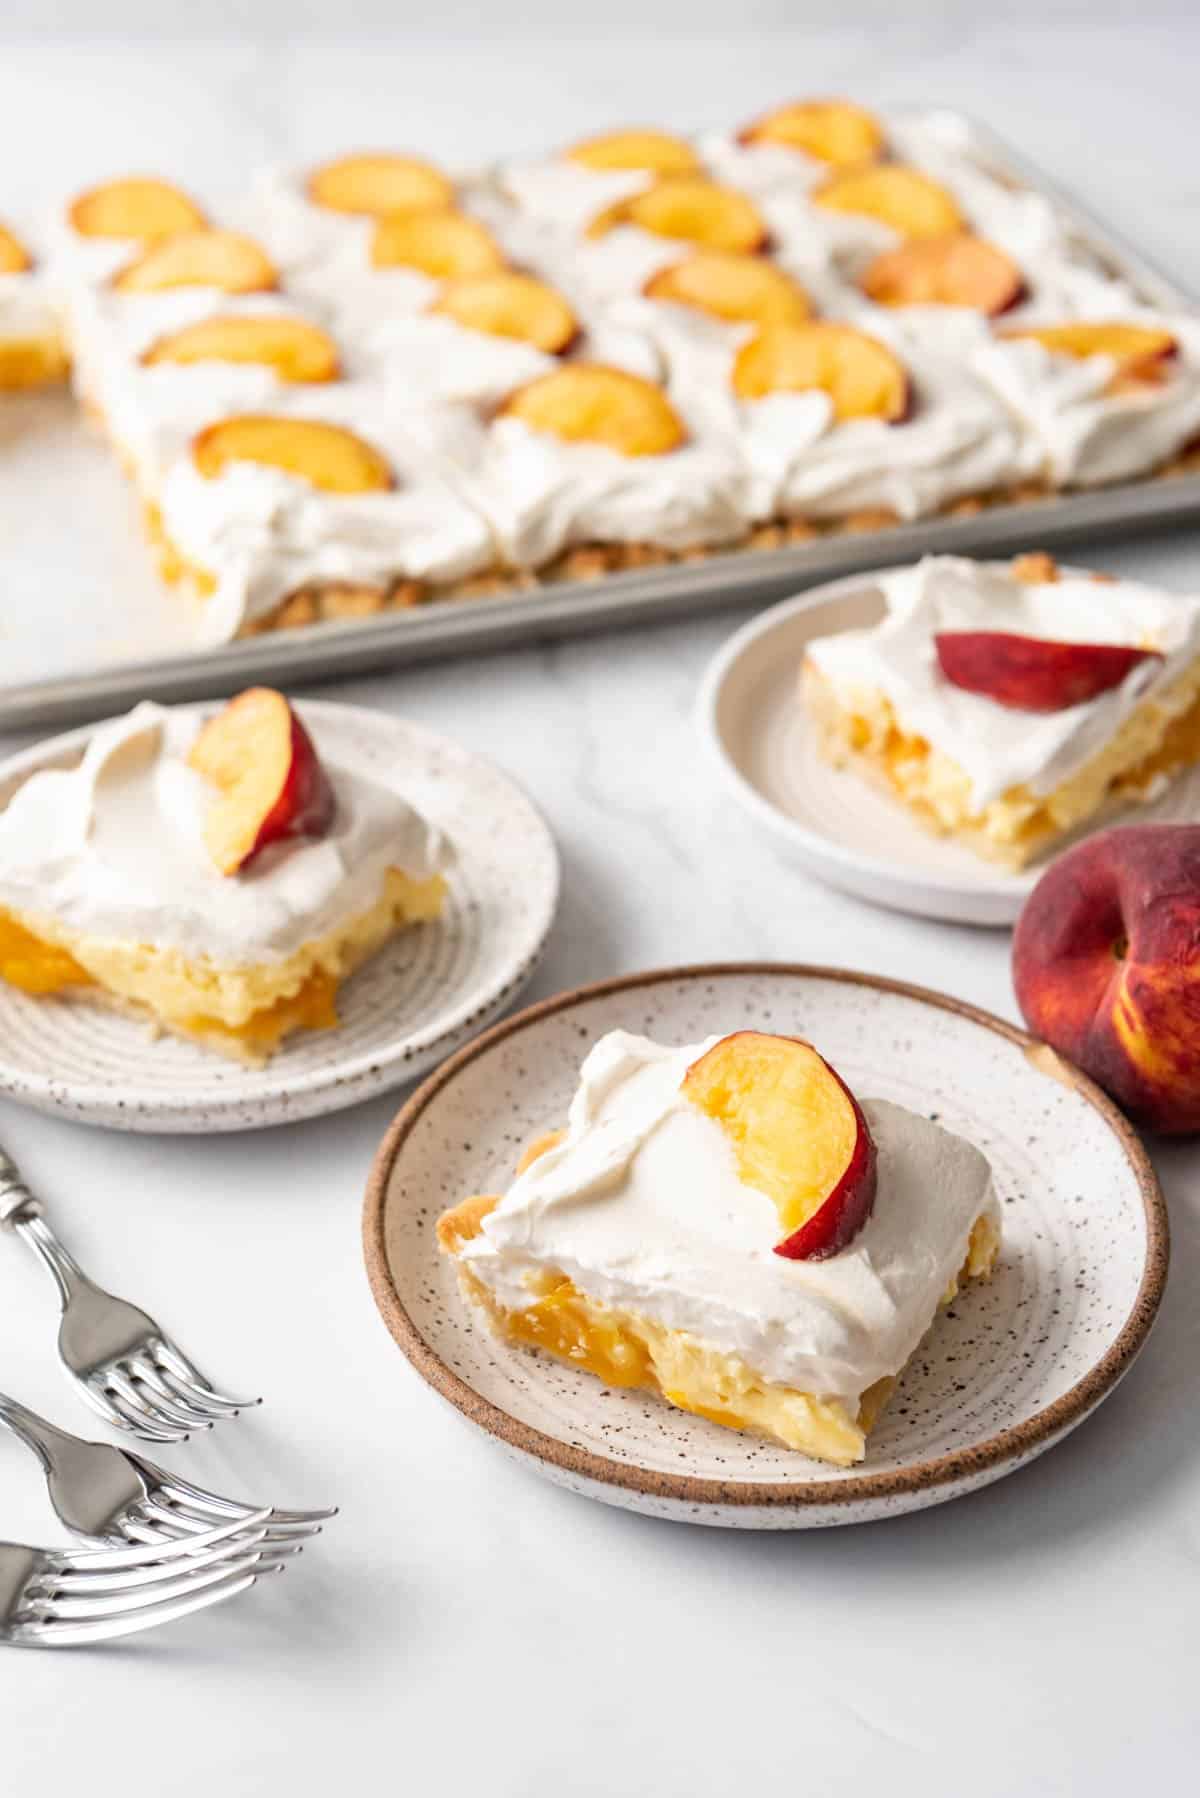 Peaches and cream pie decorated with fresh whipped cream and peach slices on plates.